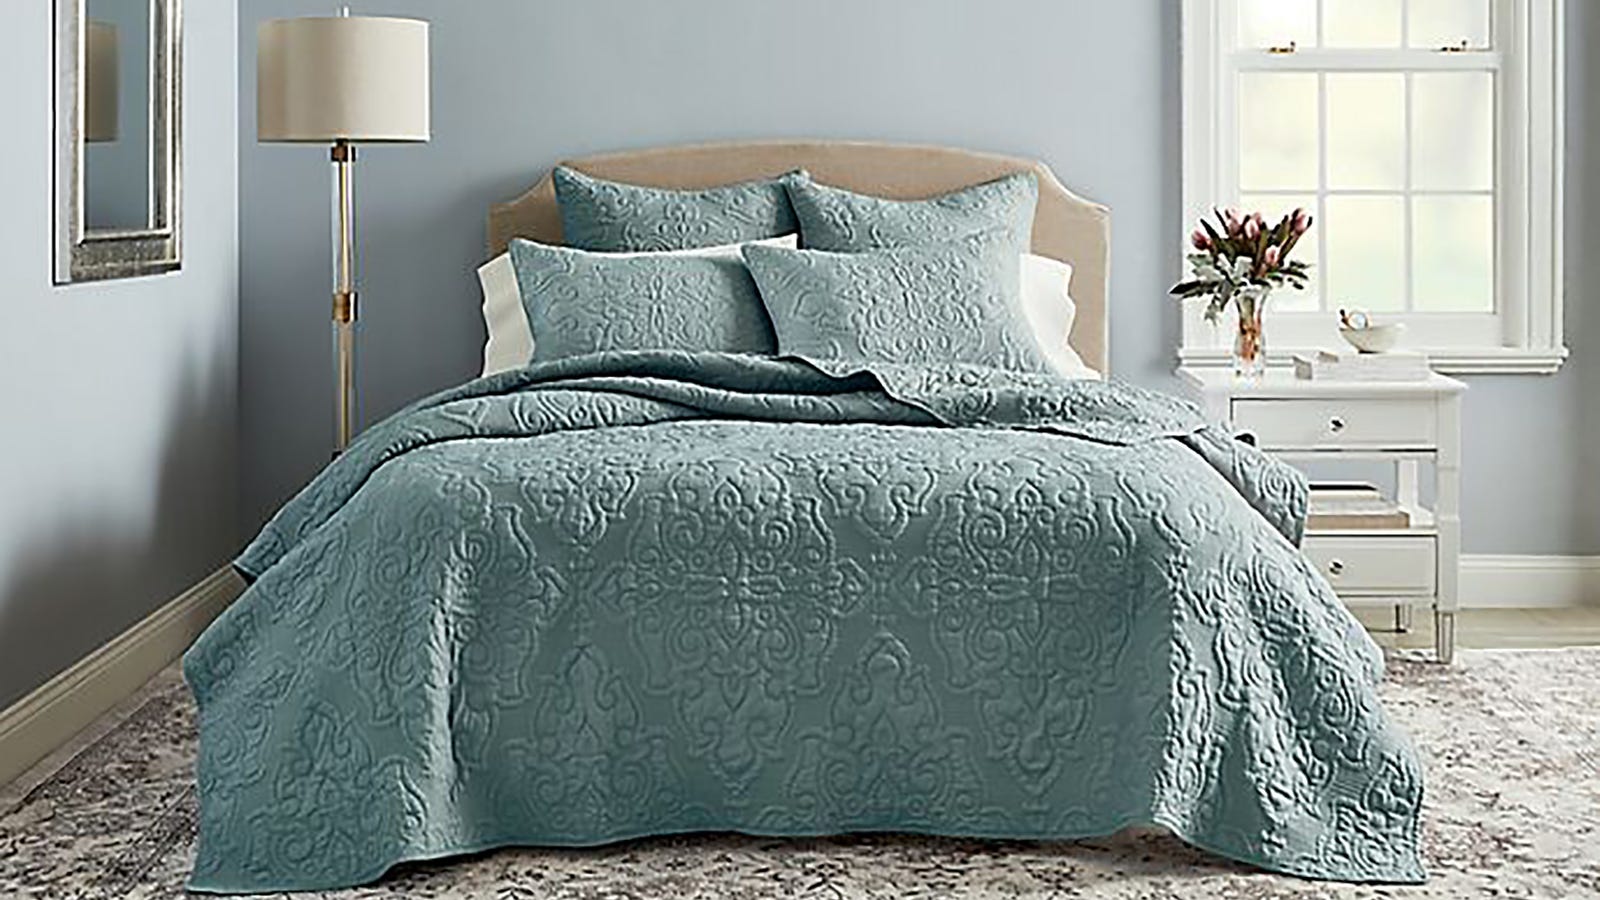 Bed Bath Beyond Get A Comforter For, King Size Duvet Bed Bath And Beyond